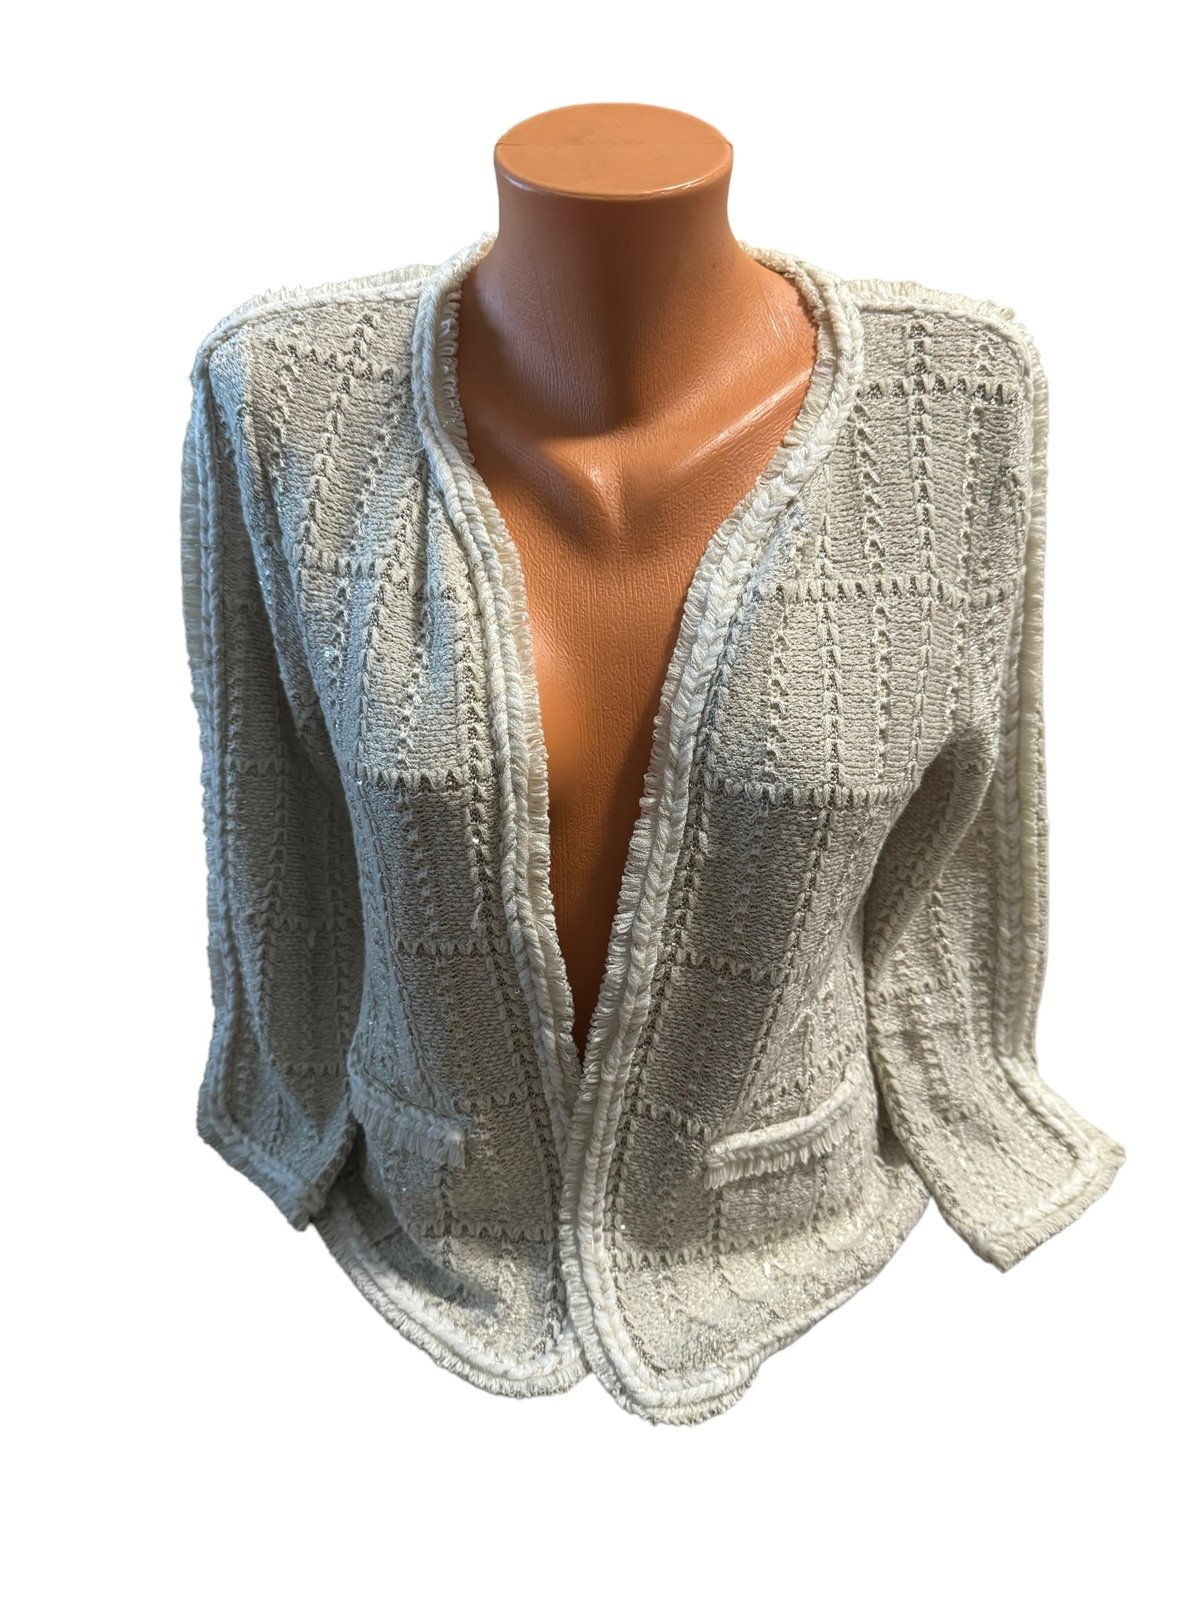 Exclusive Chicos Size 0 Open Cardigan Sweater Beige Women’s Small Nylon Open Knit Pockets HfrW5ODTf Low Price